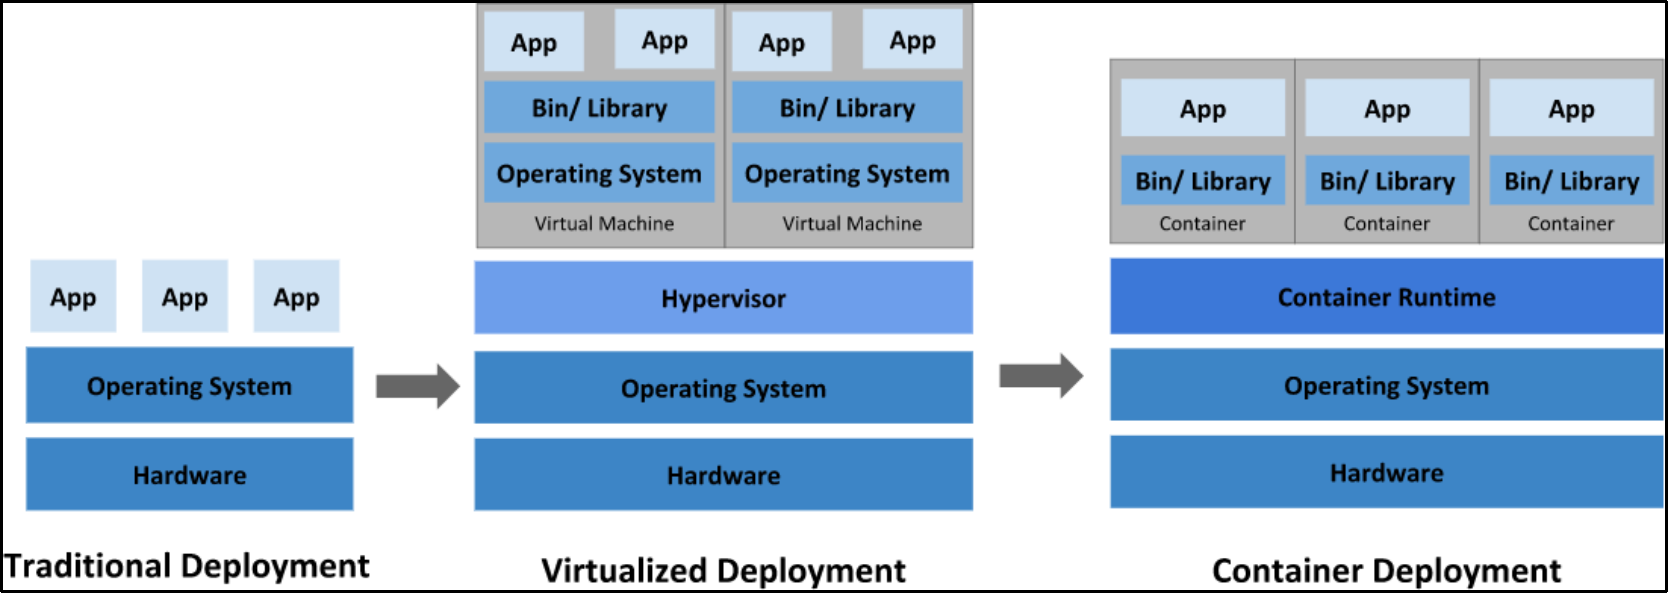 This image shows the overview of traditional, virtualized and container deployment.